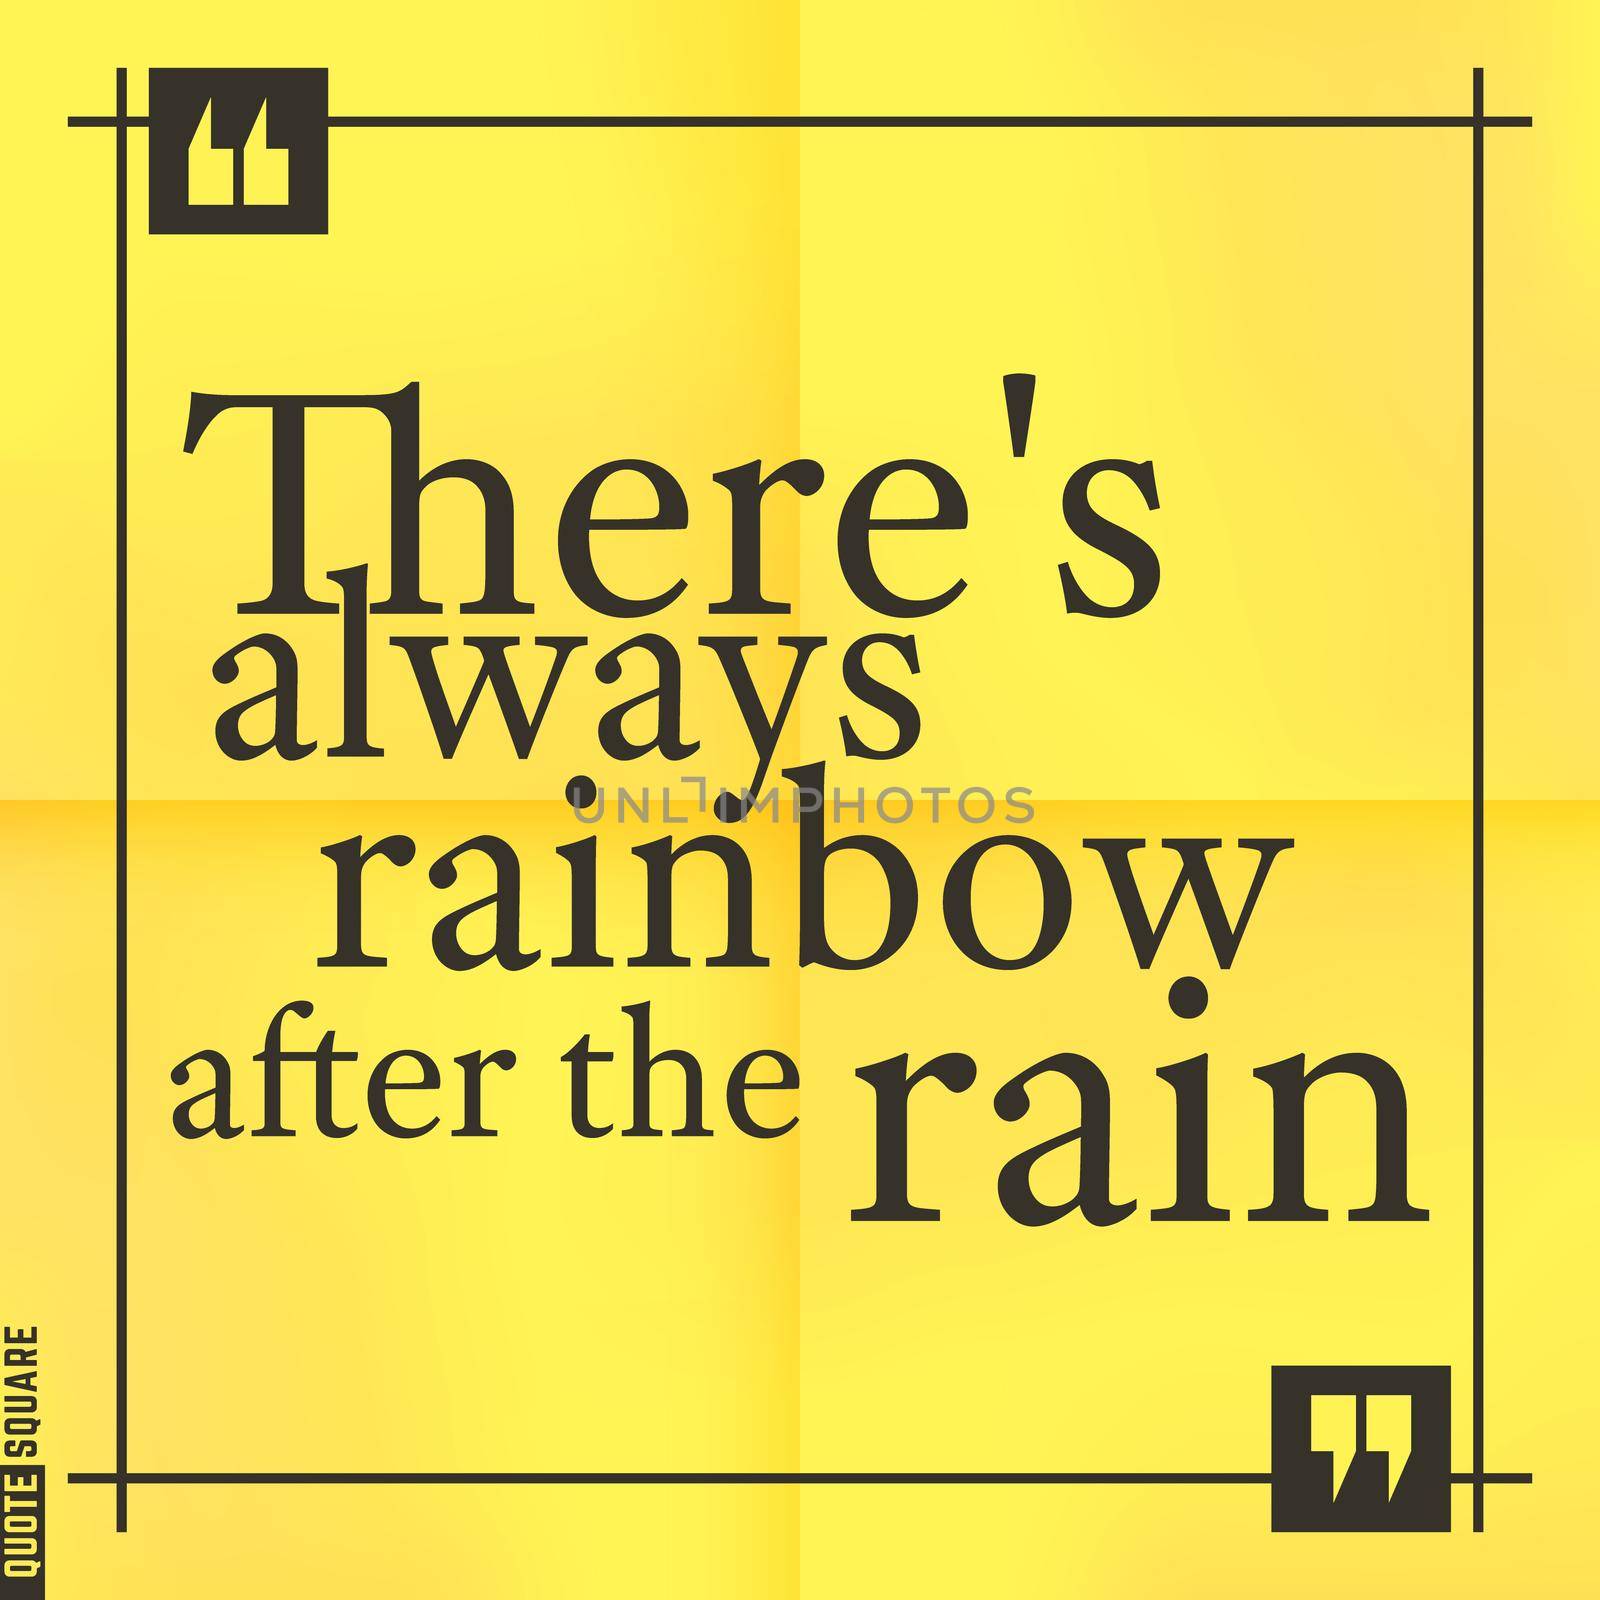 Quote Motivational Square. Inspirational Quote. Text Speech Bubble. There is always rainbow after the rain. Vector illustration.